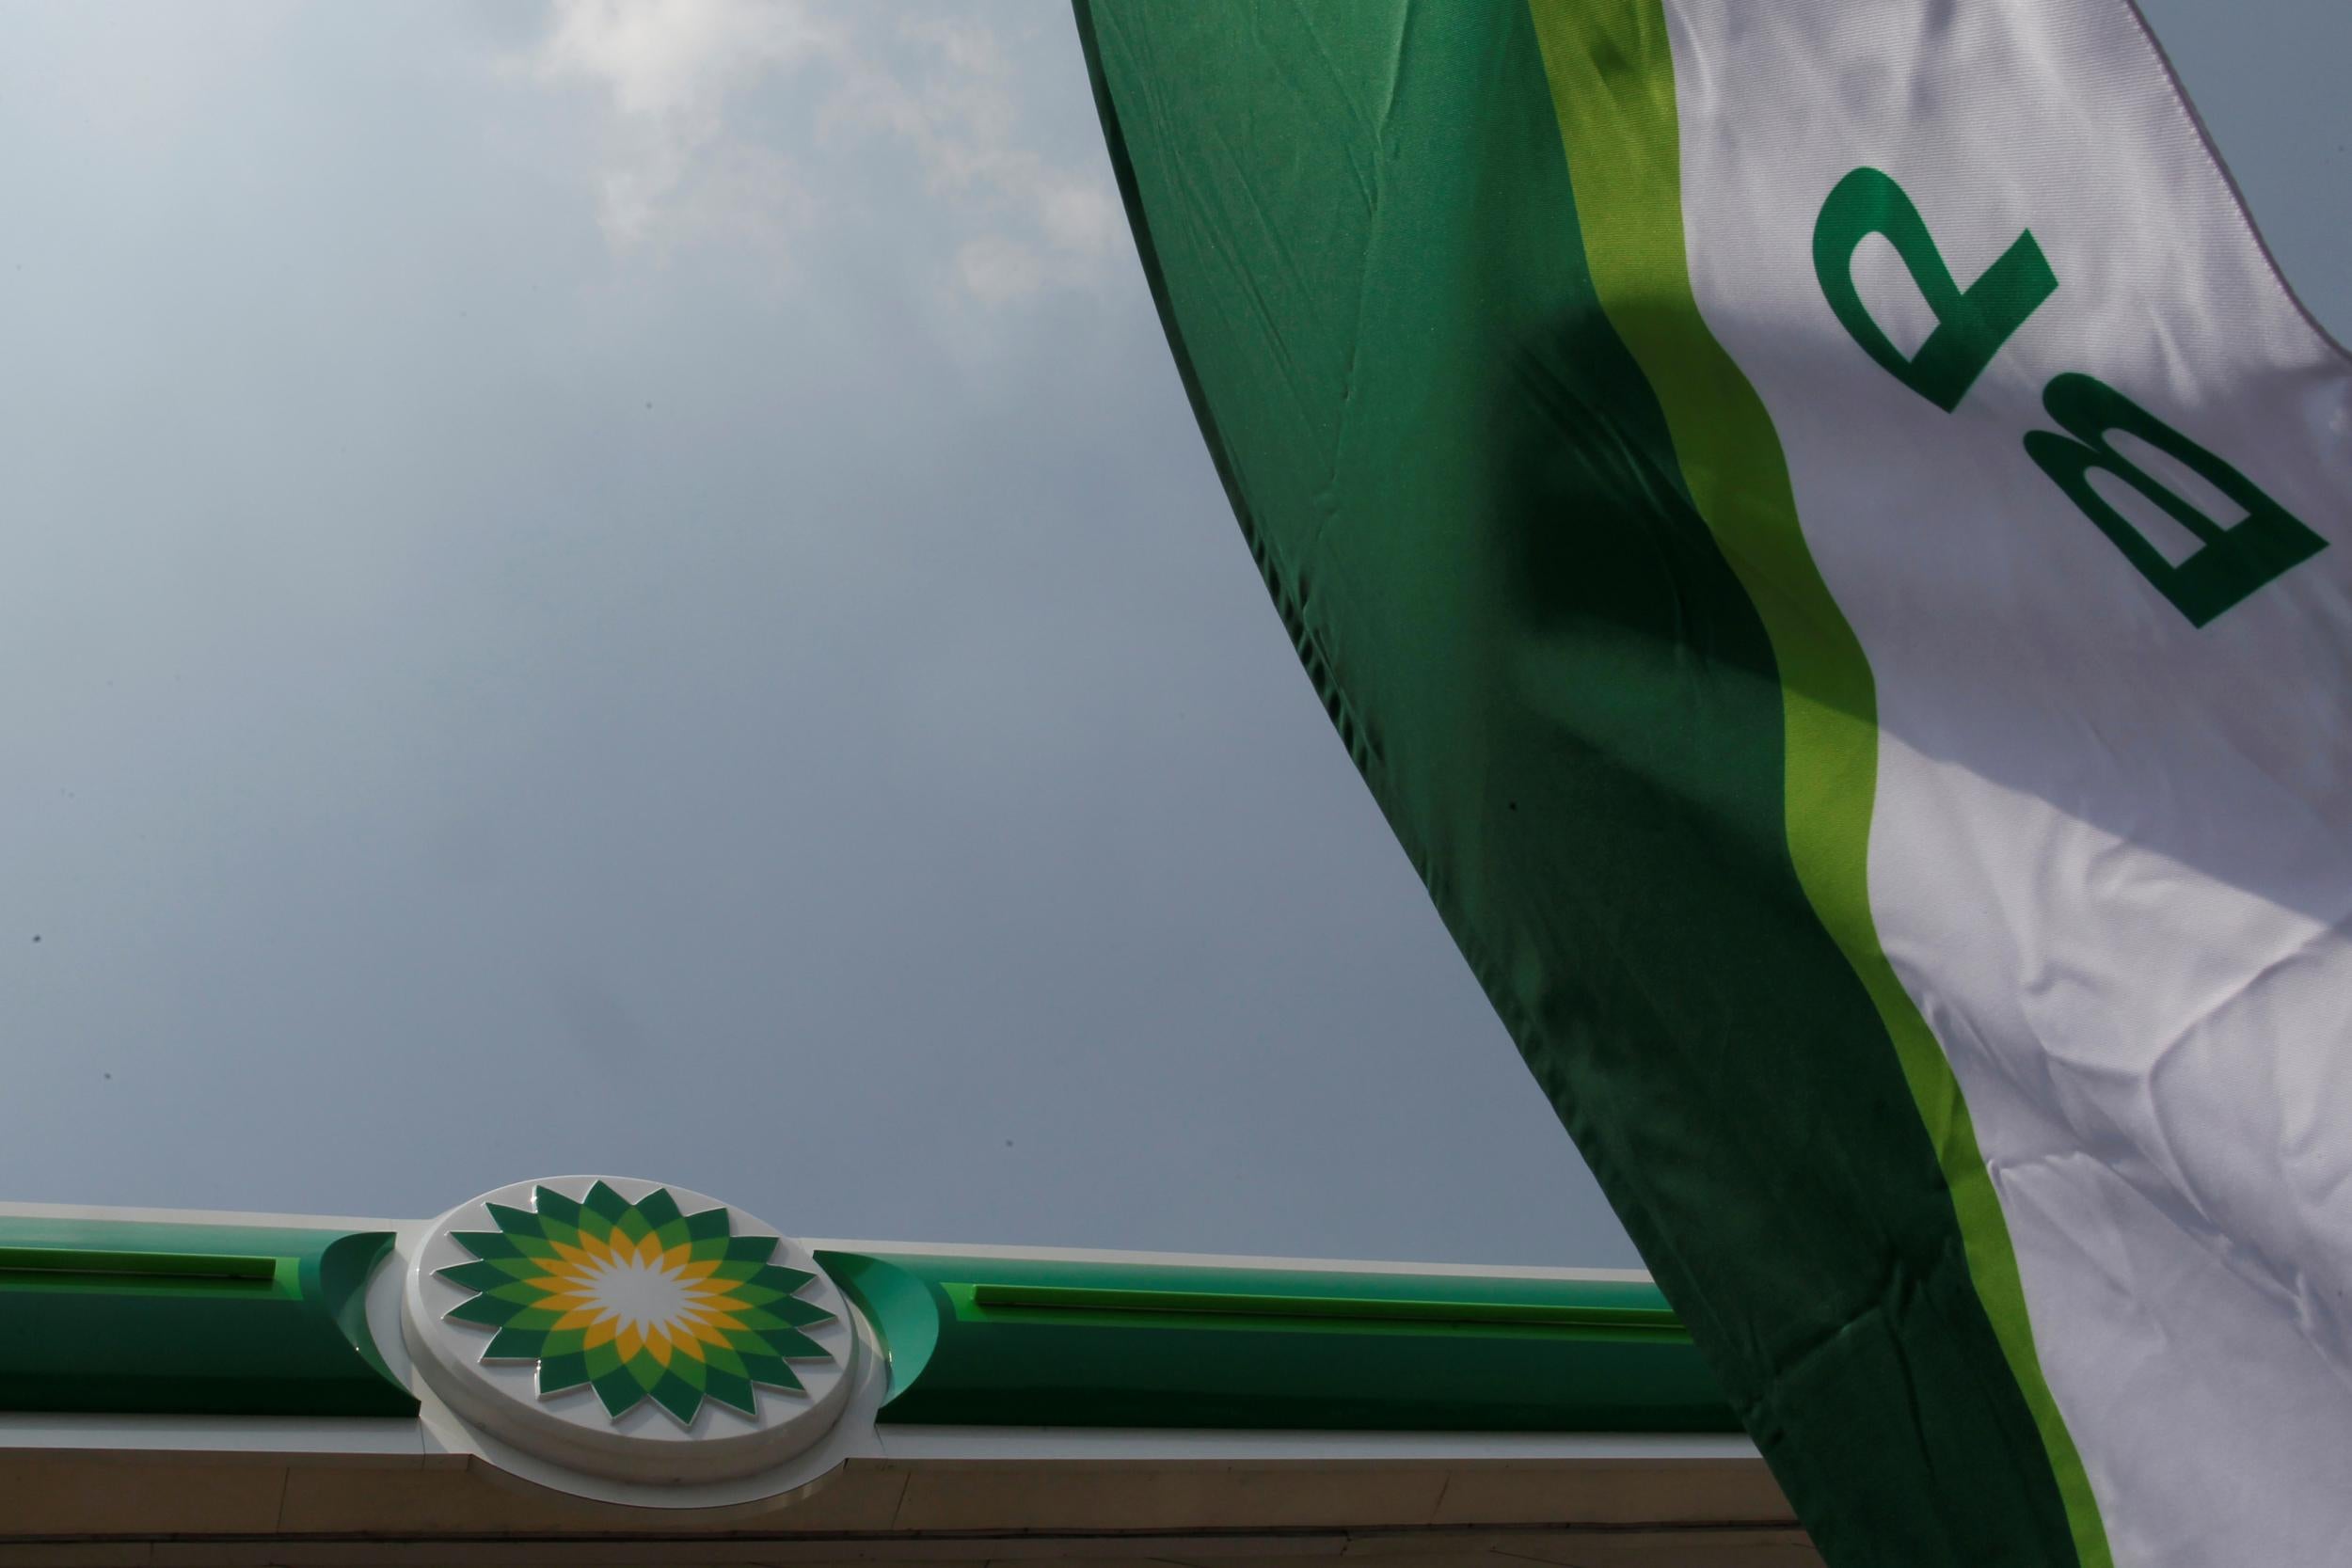 The move will strengthen the BP's finances as it attempts to deal with lower fossil fuel prices caused by the coronavirus pandemic